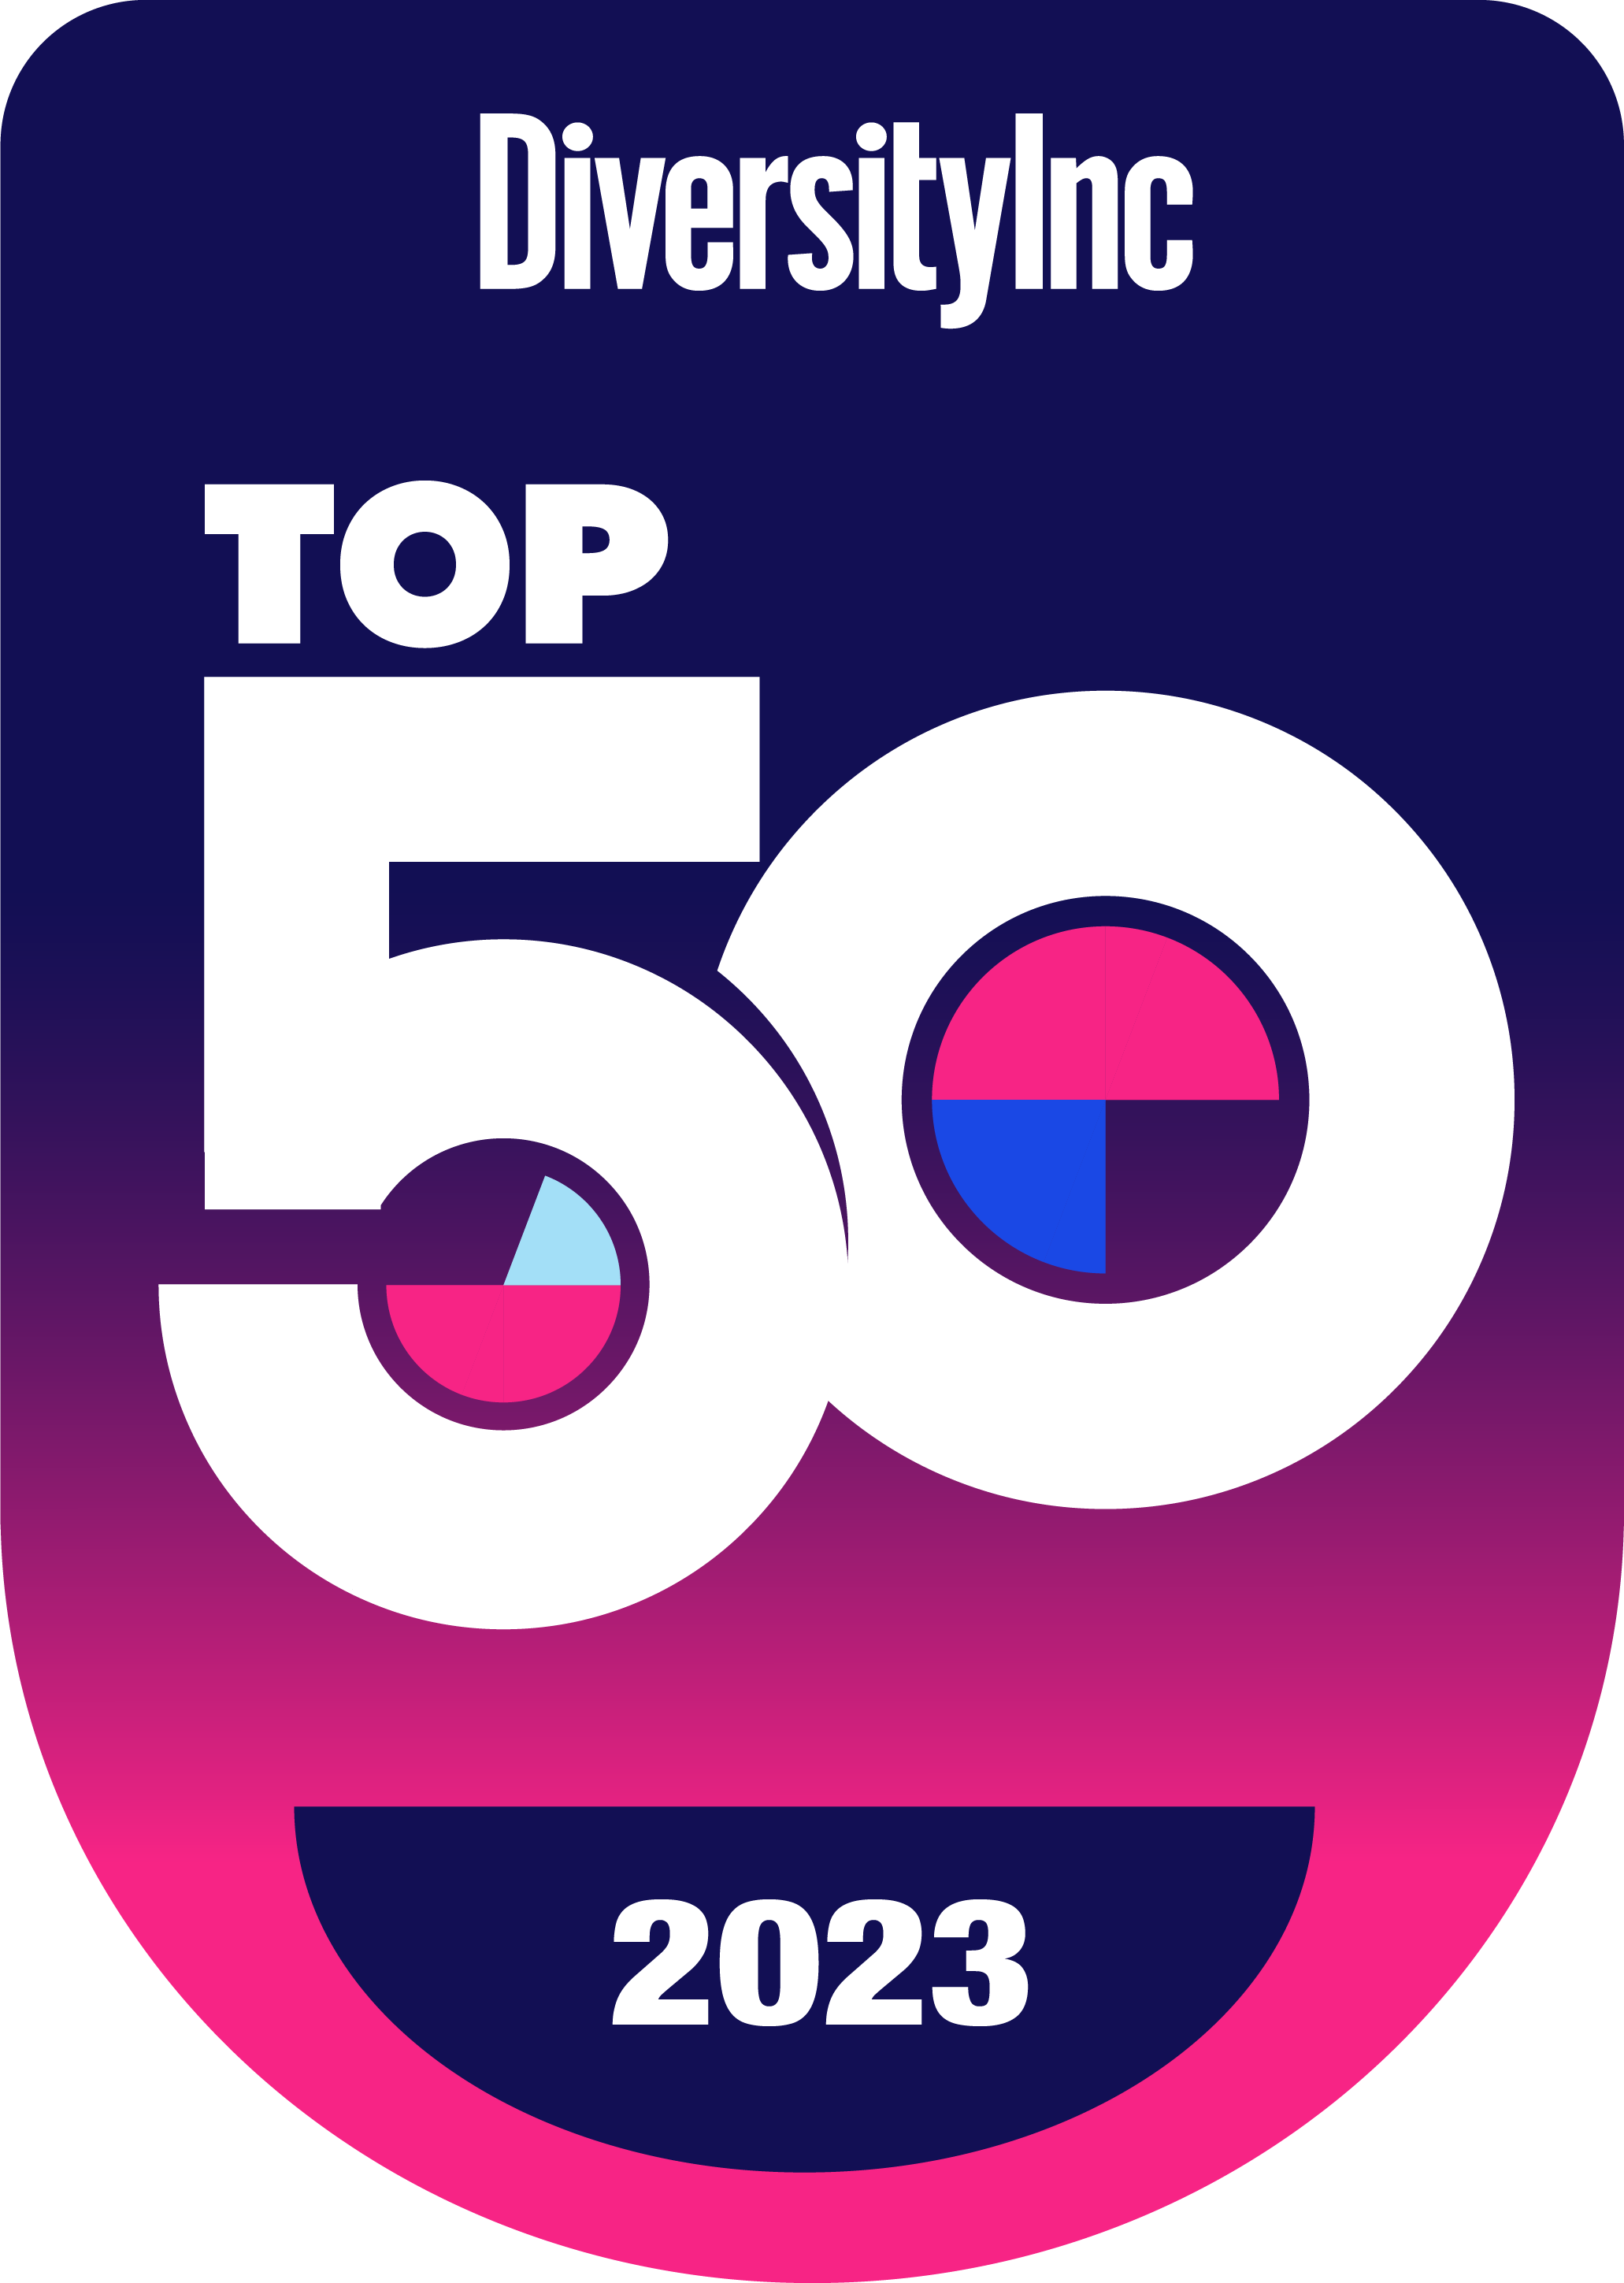 Capital One's award from DiversityInc, 2023 Top 50 Employer